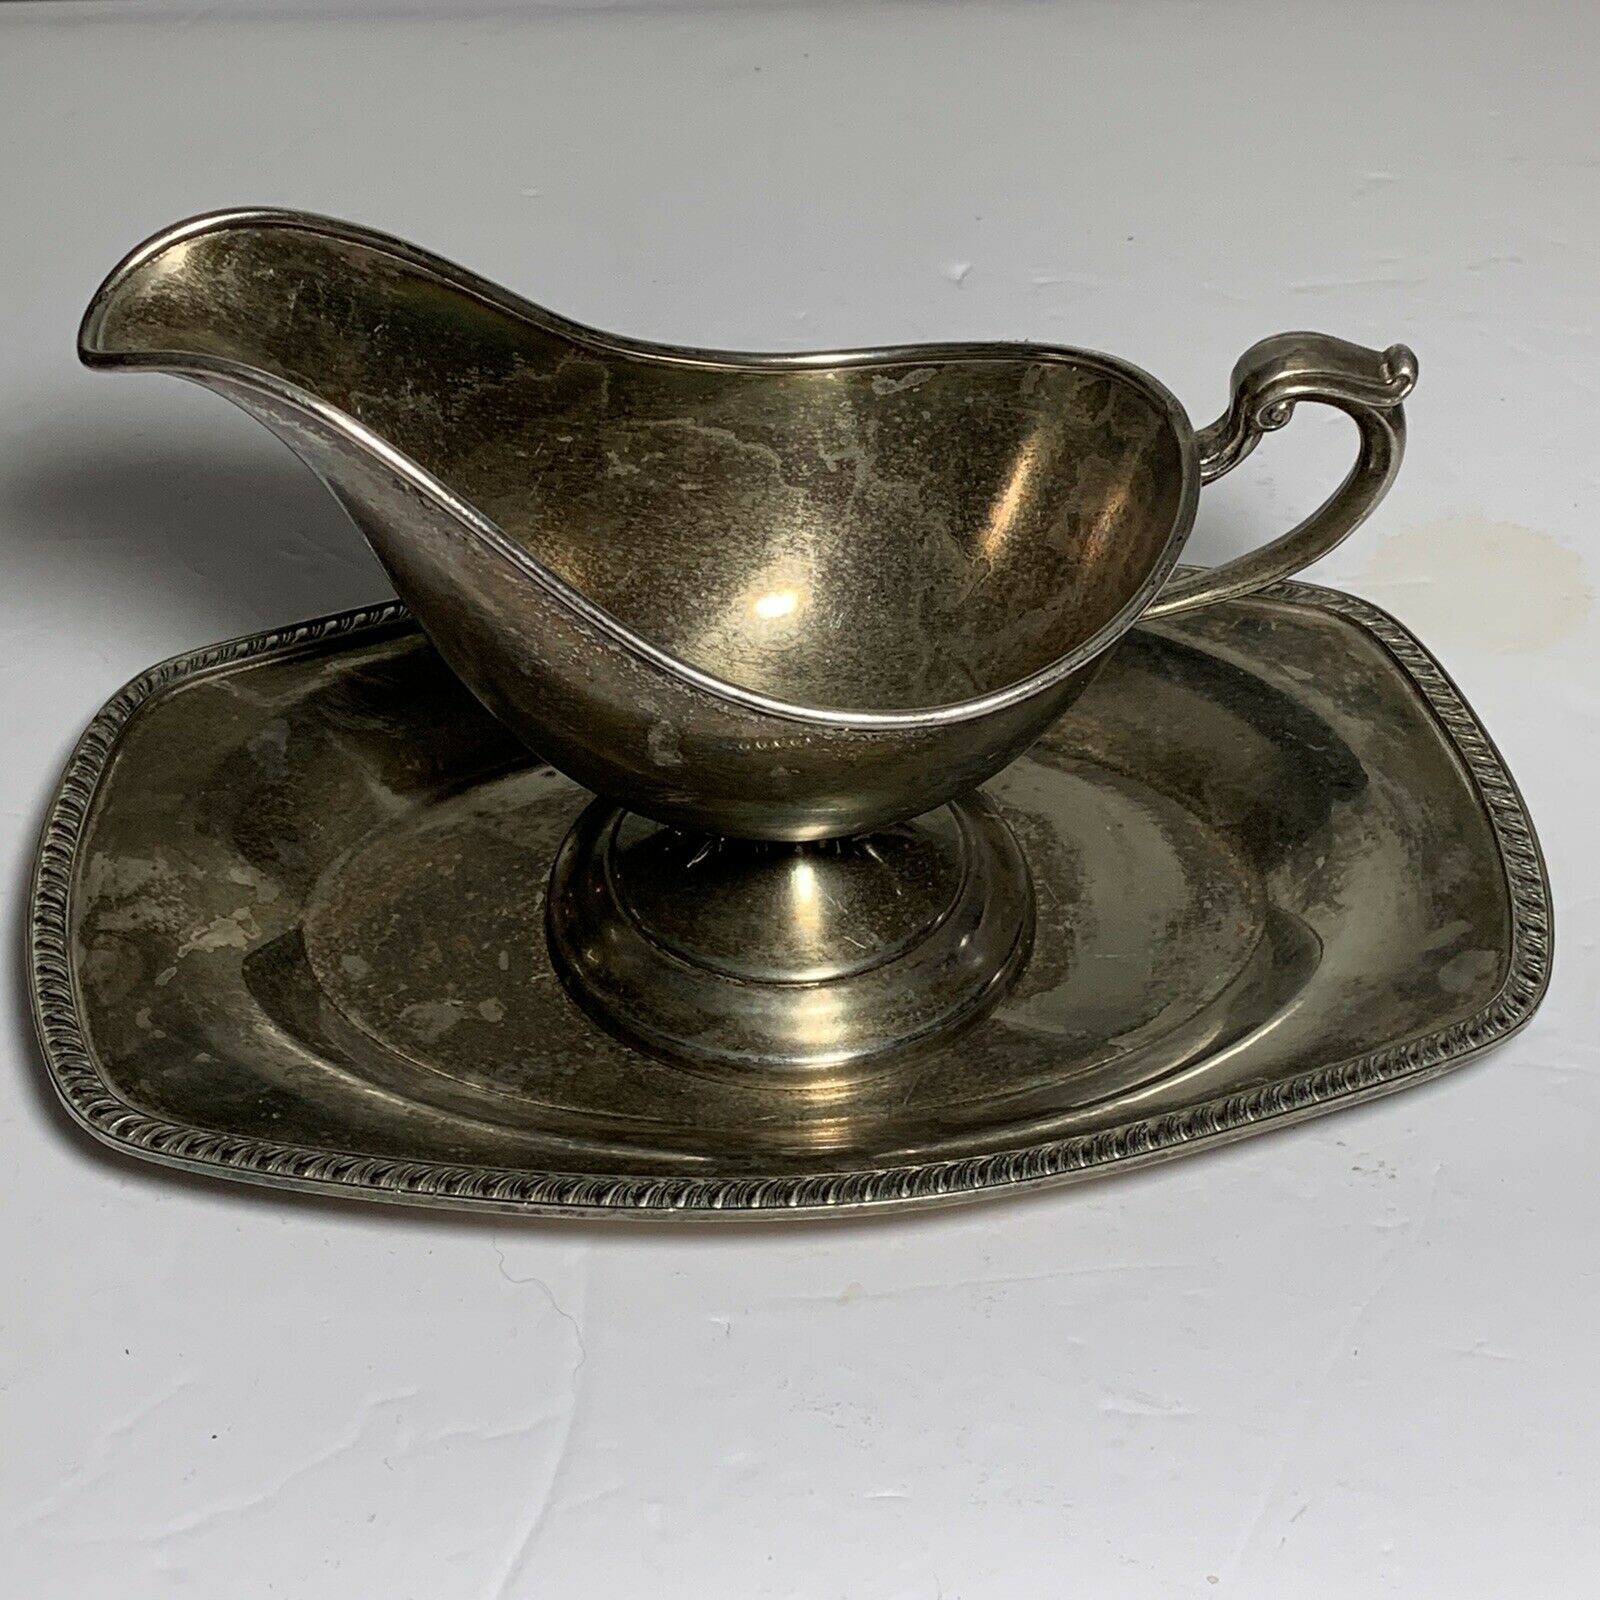 Vintage Silver Plated Gravy Boat & Serving Plate English Silver Manufacturing Co